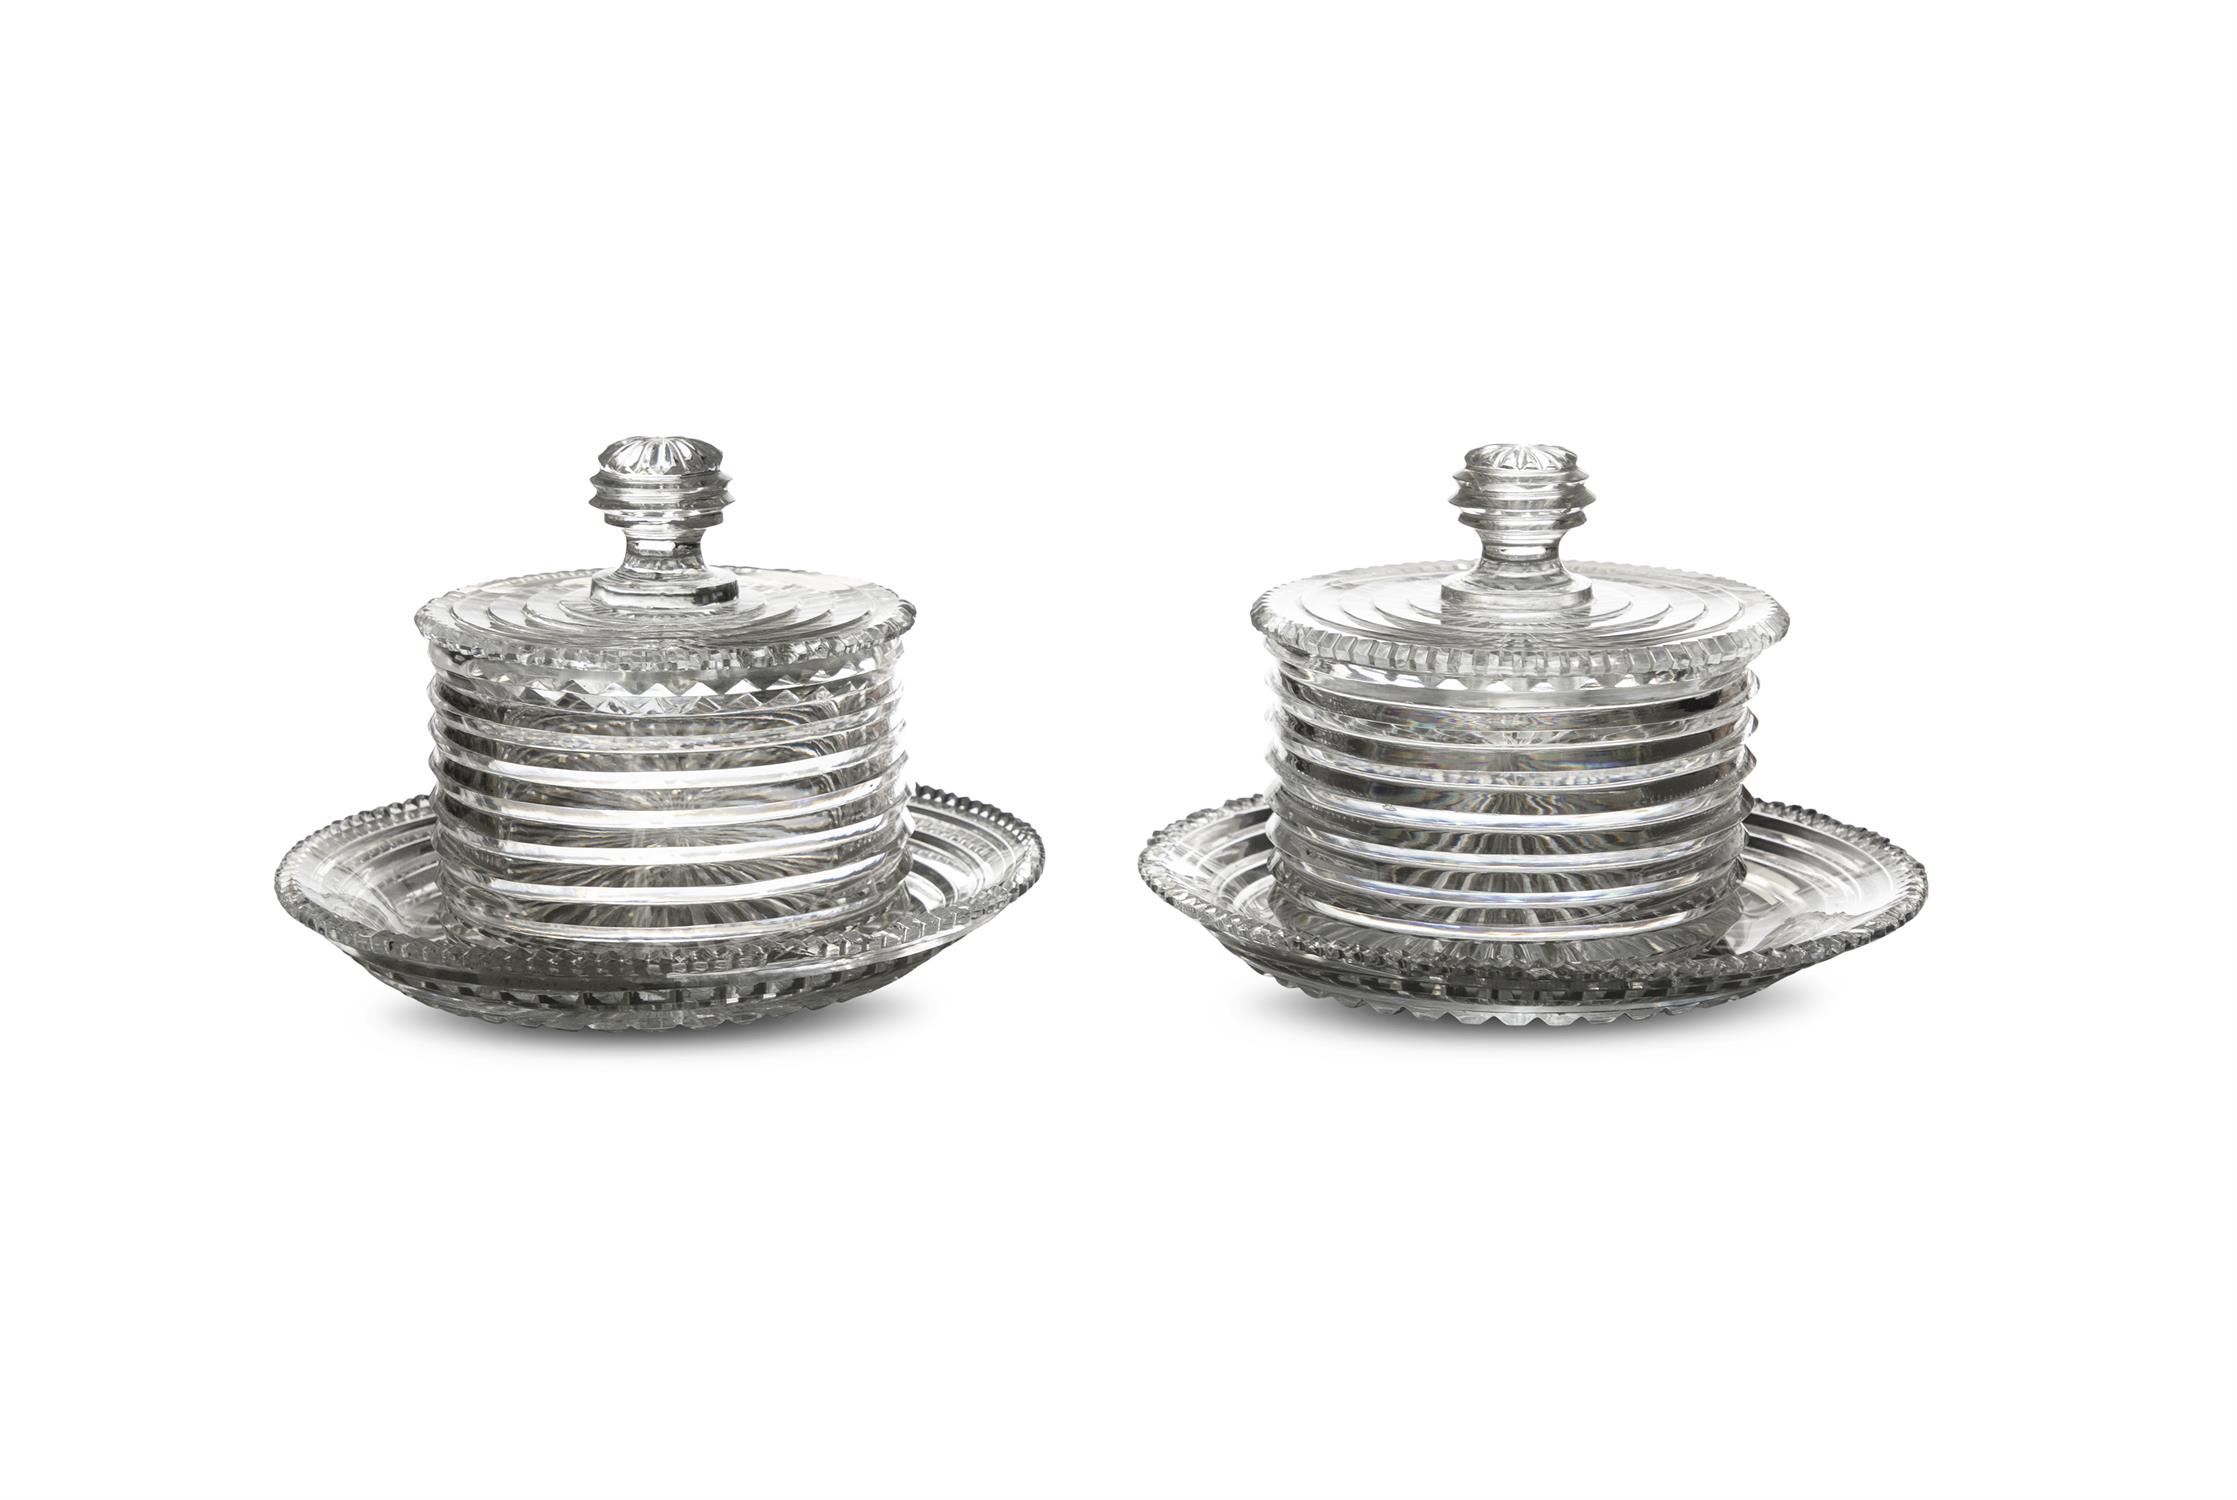 A FINE PAIR OF IRISH REGENCY CUTGLASS BUTTER POTS AND COVERS, with stands c.1800,